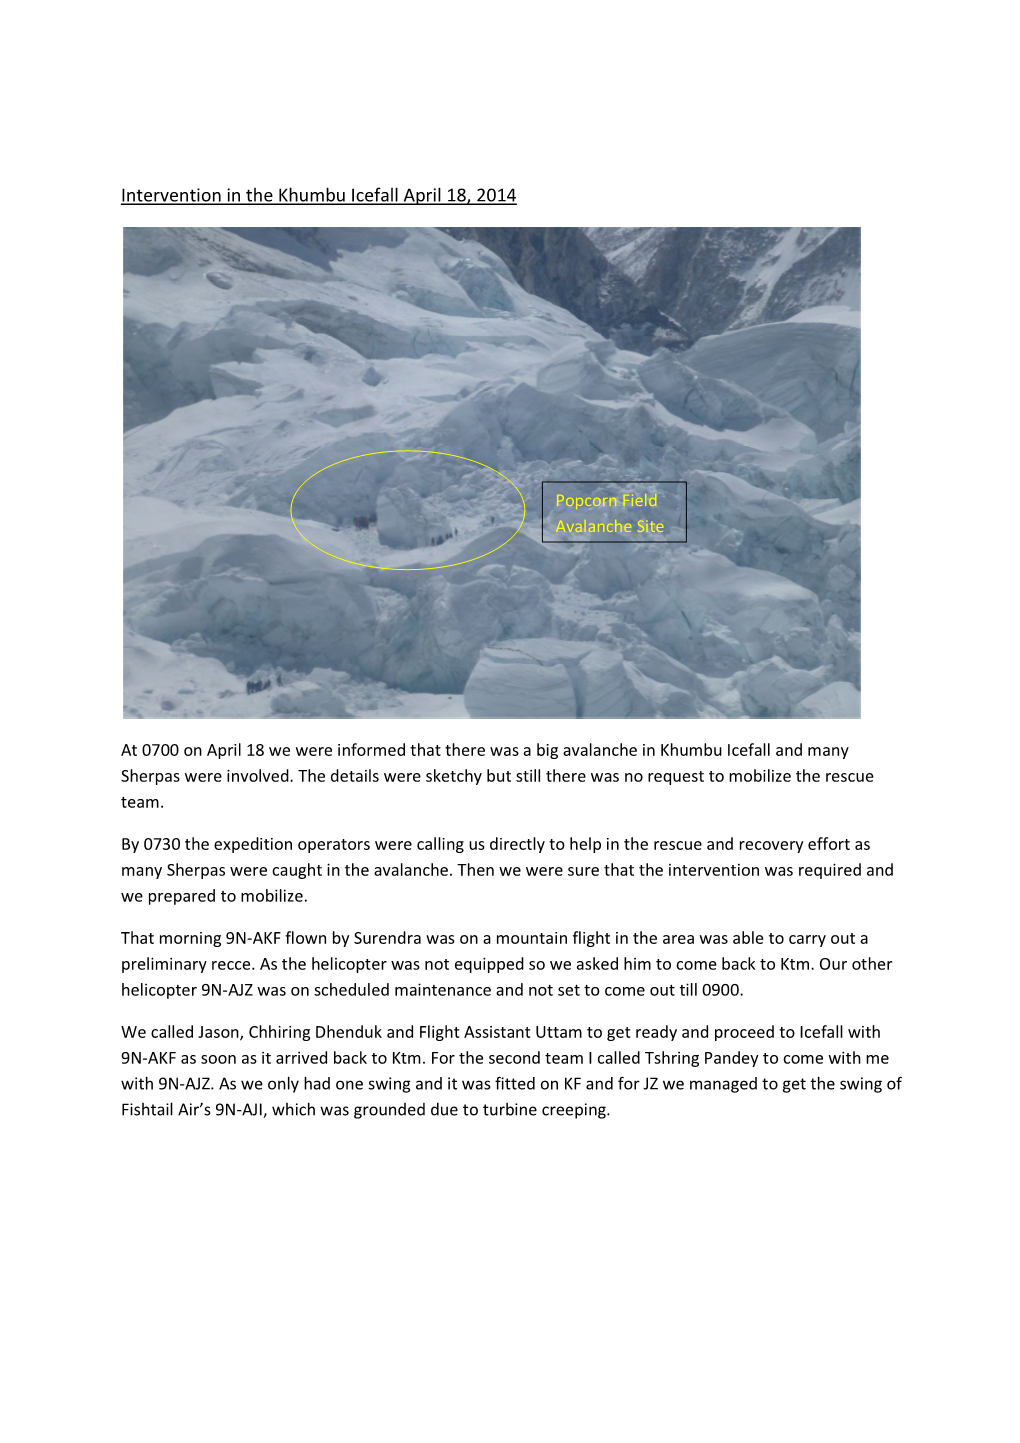 Intervention in the Khumbu Icefall April 18, 2014